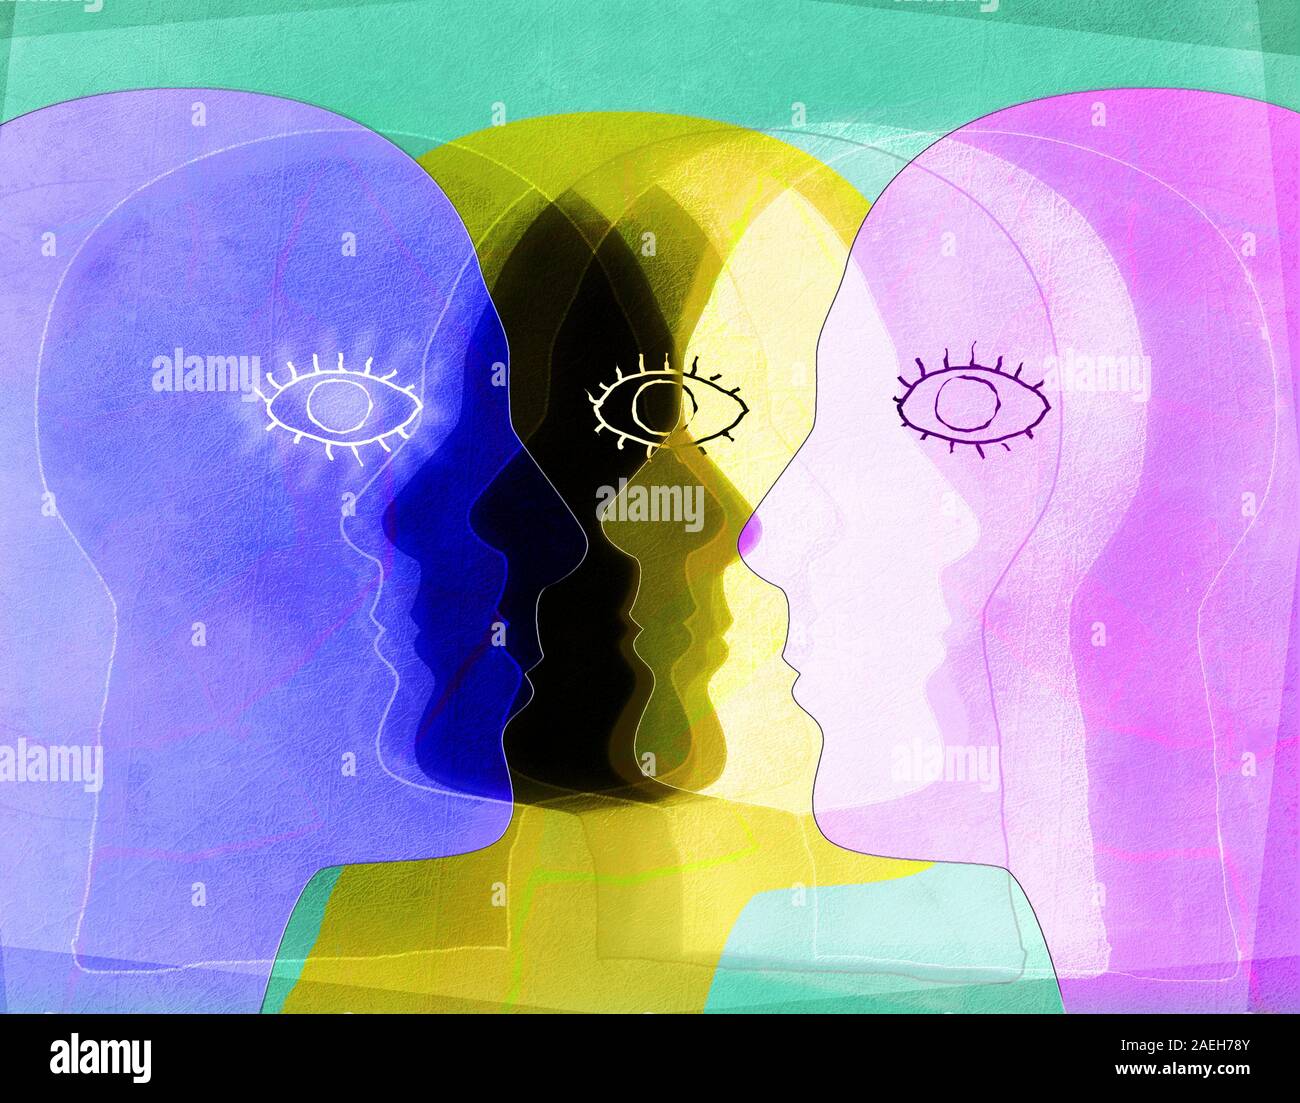 colored faces silhouette digital illustration Stock Photo